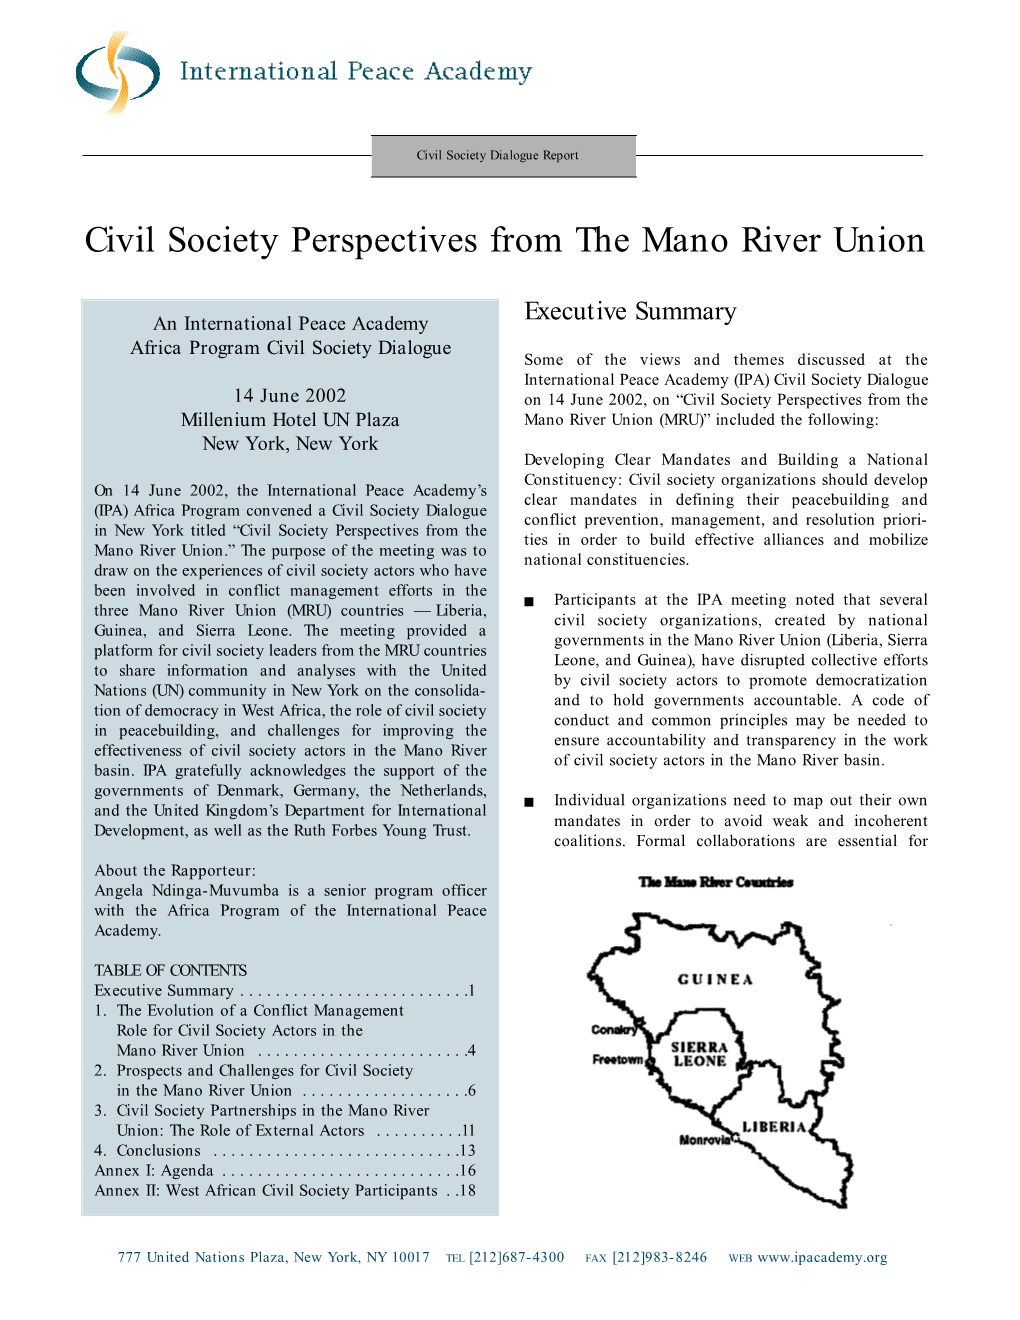 Civil Society Perspectives from the Mano River Union